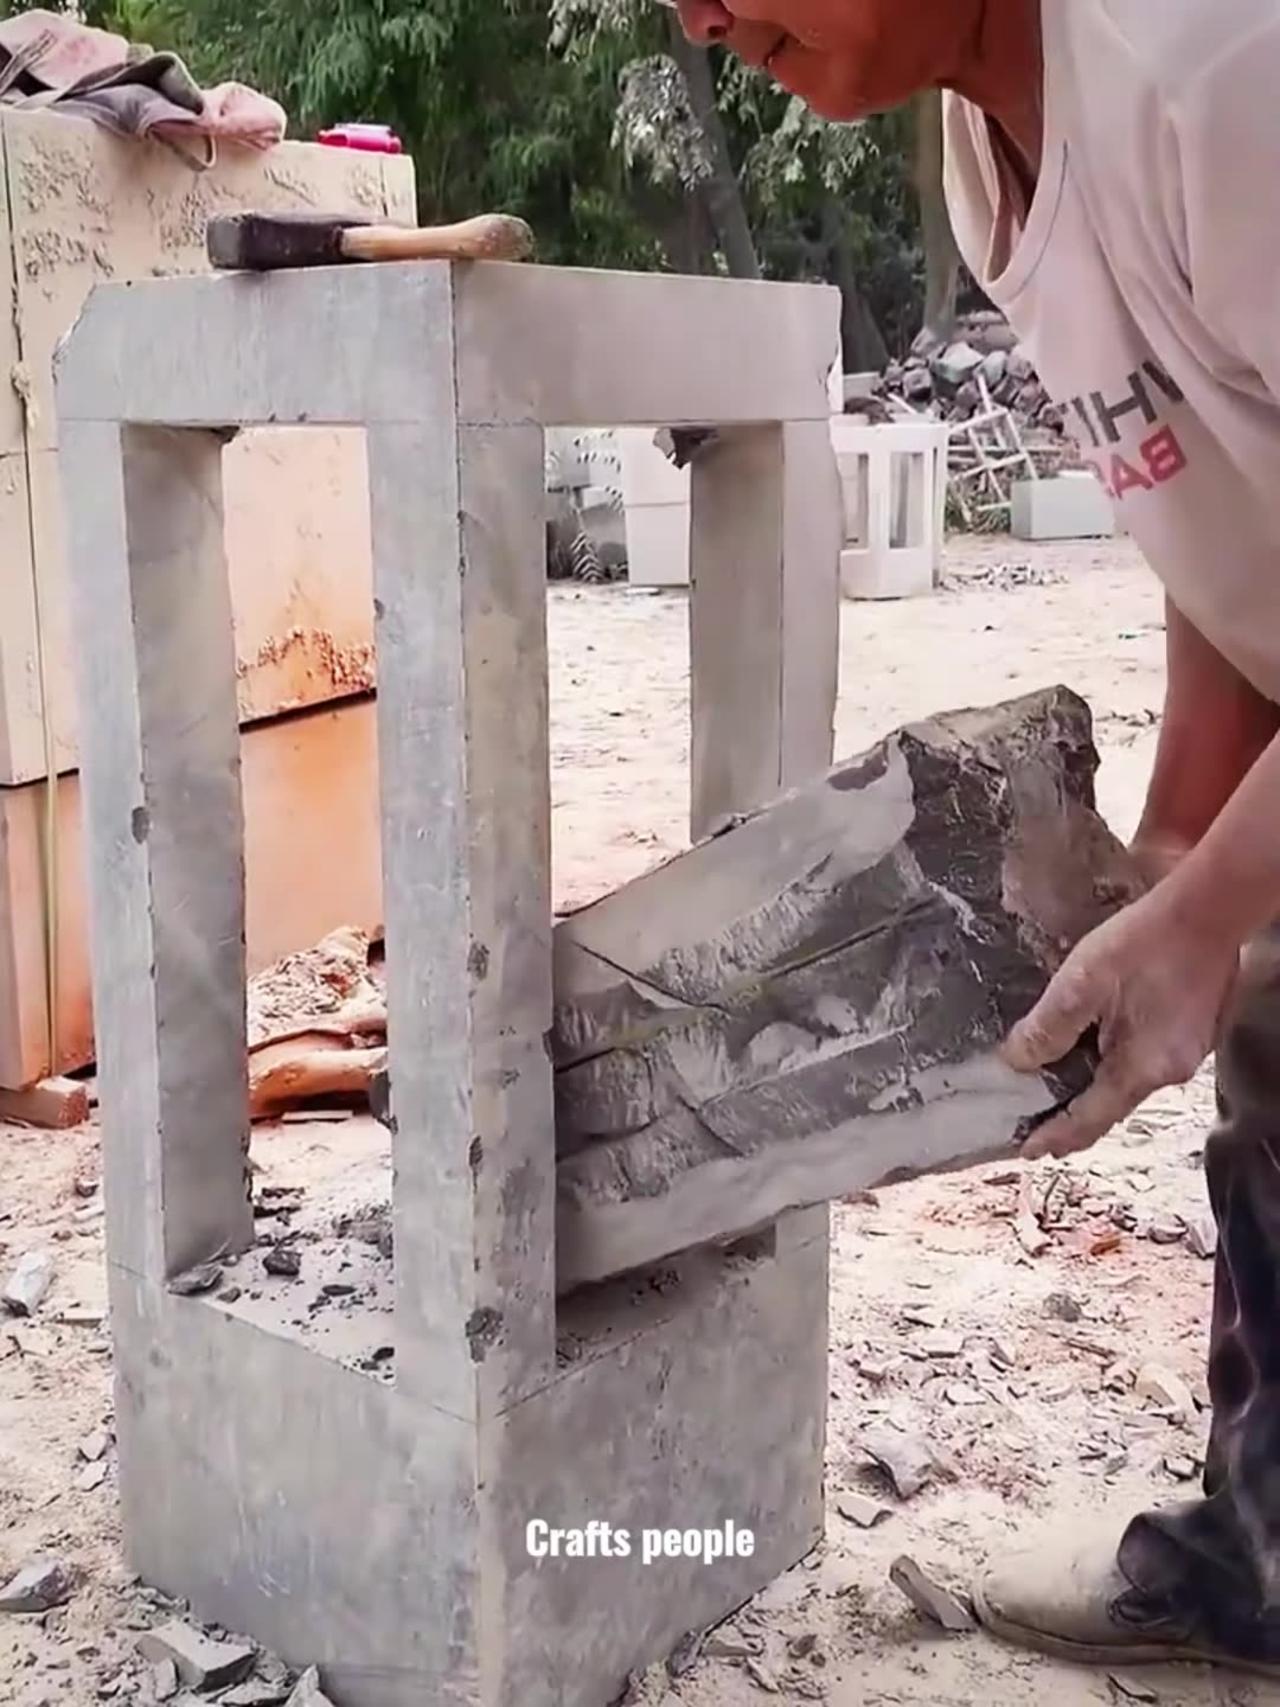 A hammer and chisel carved out a stone stool